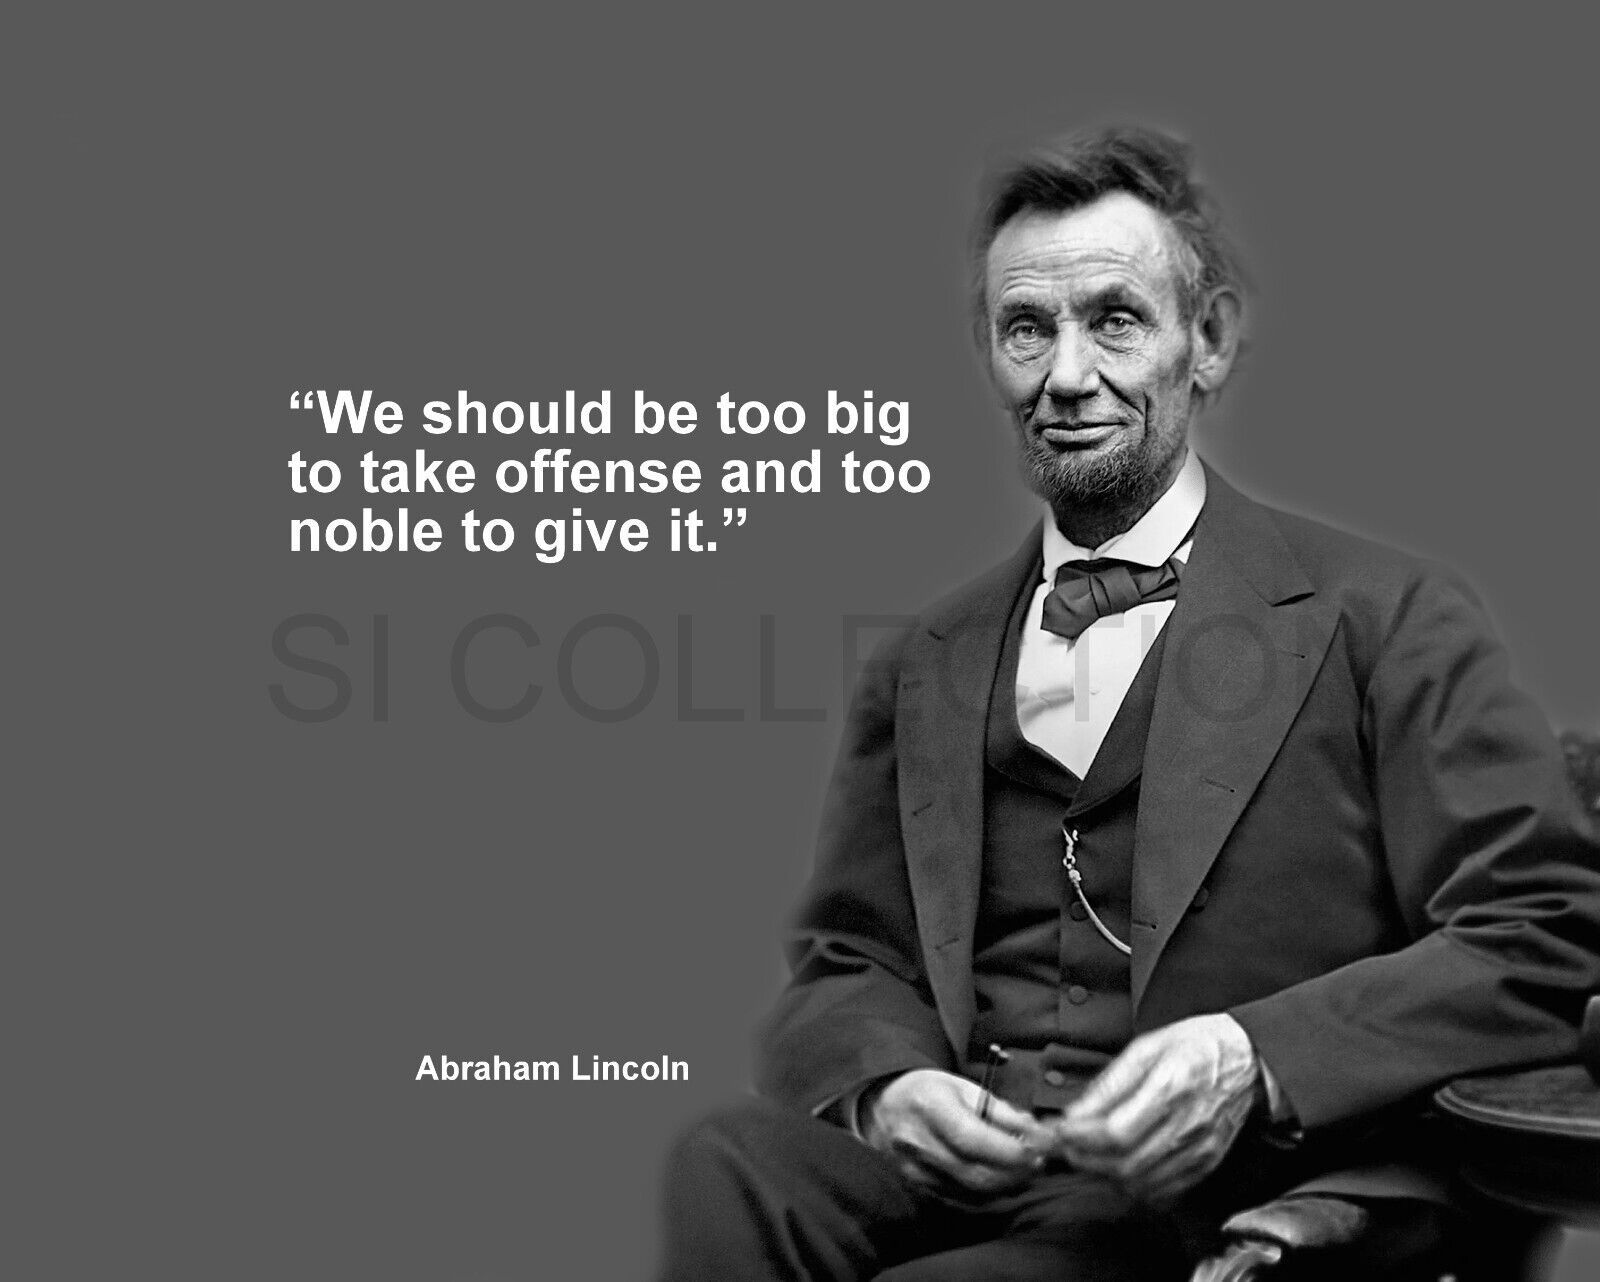 Primary image for ABRAHAM LINCOLN "WE SHOULD BE TOO BIG TO TAKE..." QUOTE PHOTO VARIOUS SIZES